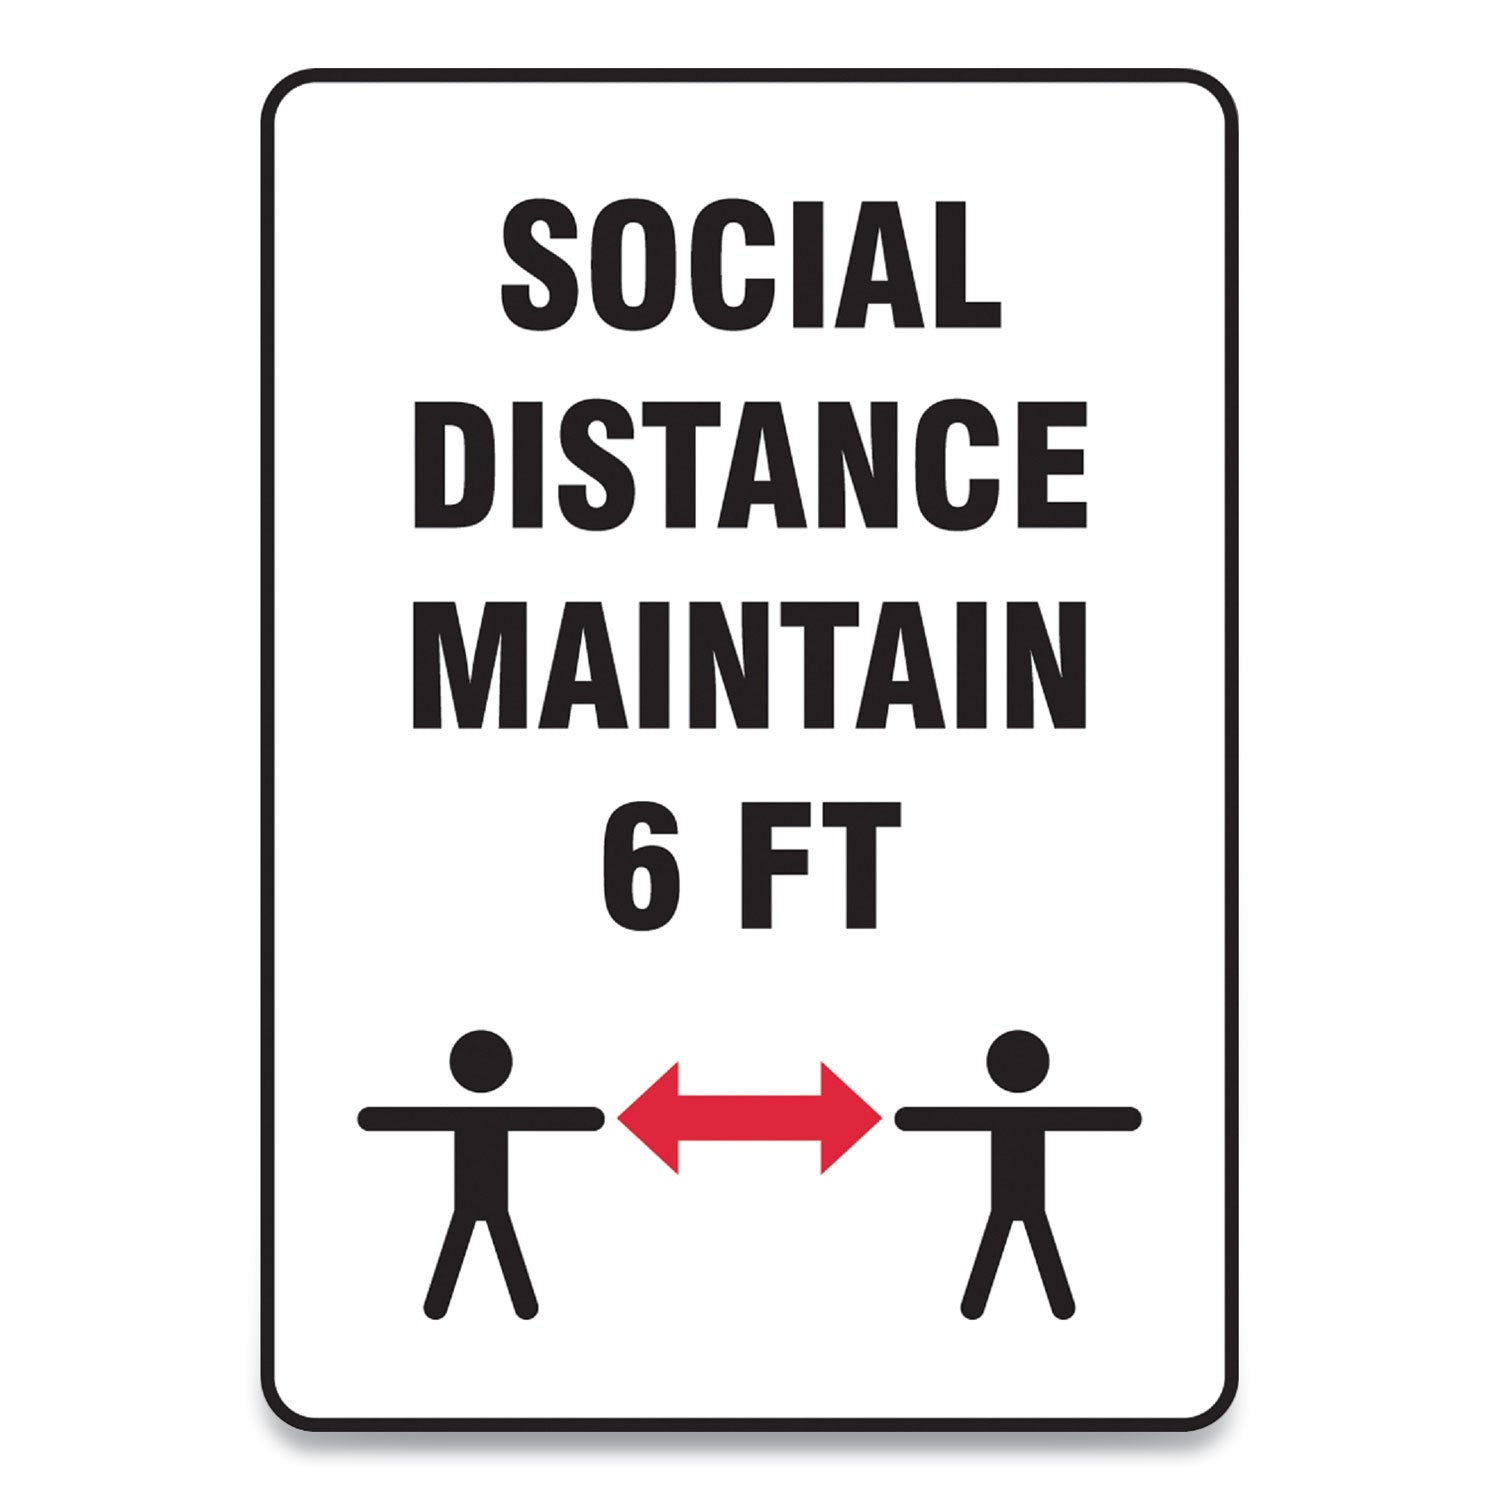 social-distance-signs-wall-7-x-10-social-distance-maintain-6-ft-2-humans-arrows-white-10-pack_gn1mgnf547vpesp - 1